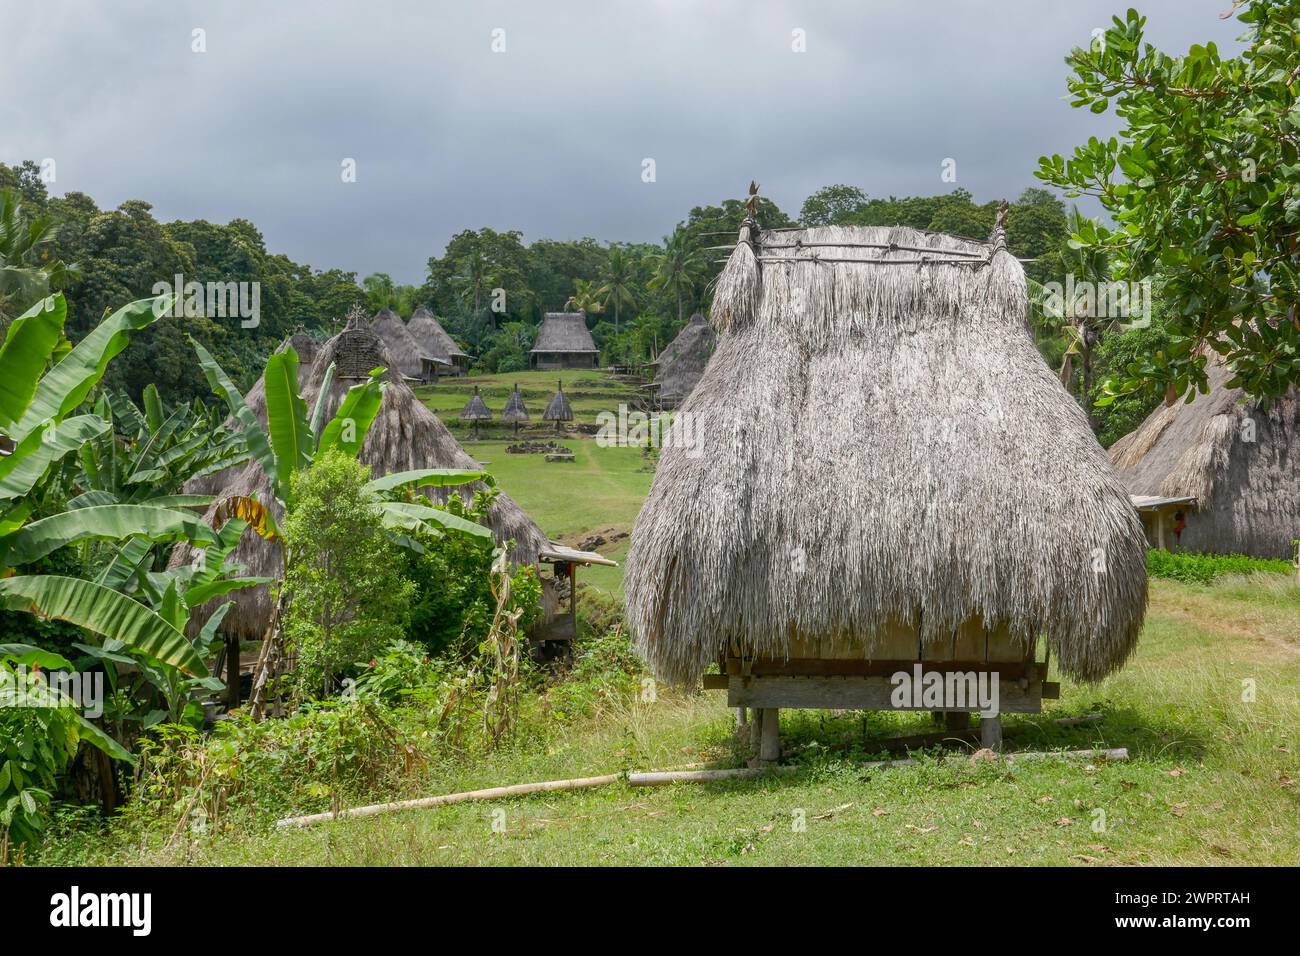 Landscape view of Belaragi traditional village of the Ngada people or tribe near Aimere on Flores island, East Nusa Tenggara, Indonesia Stock Photo